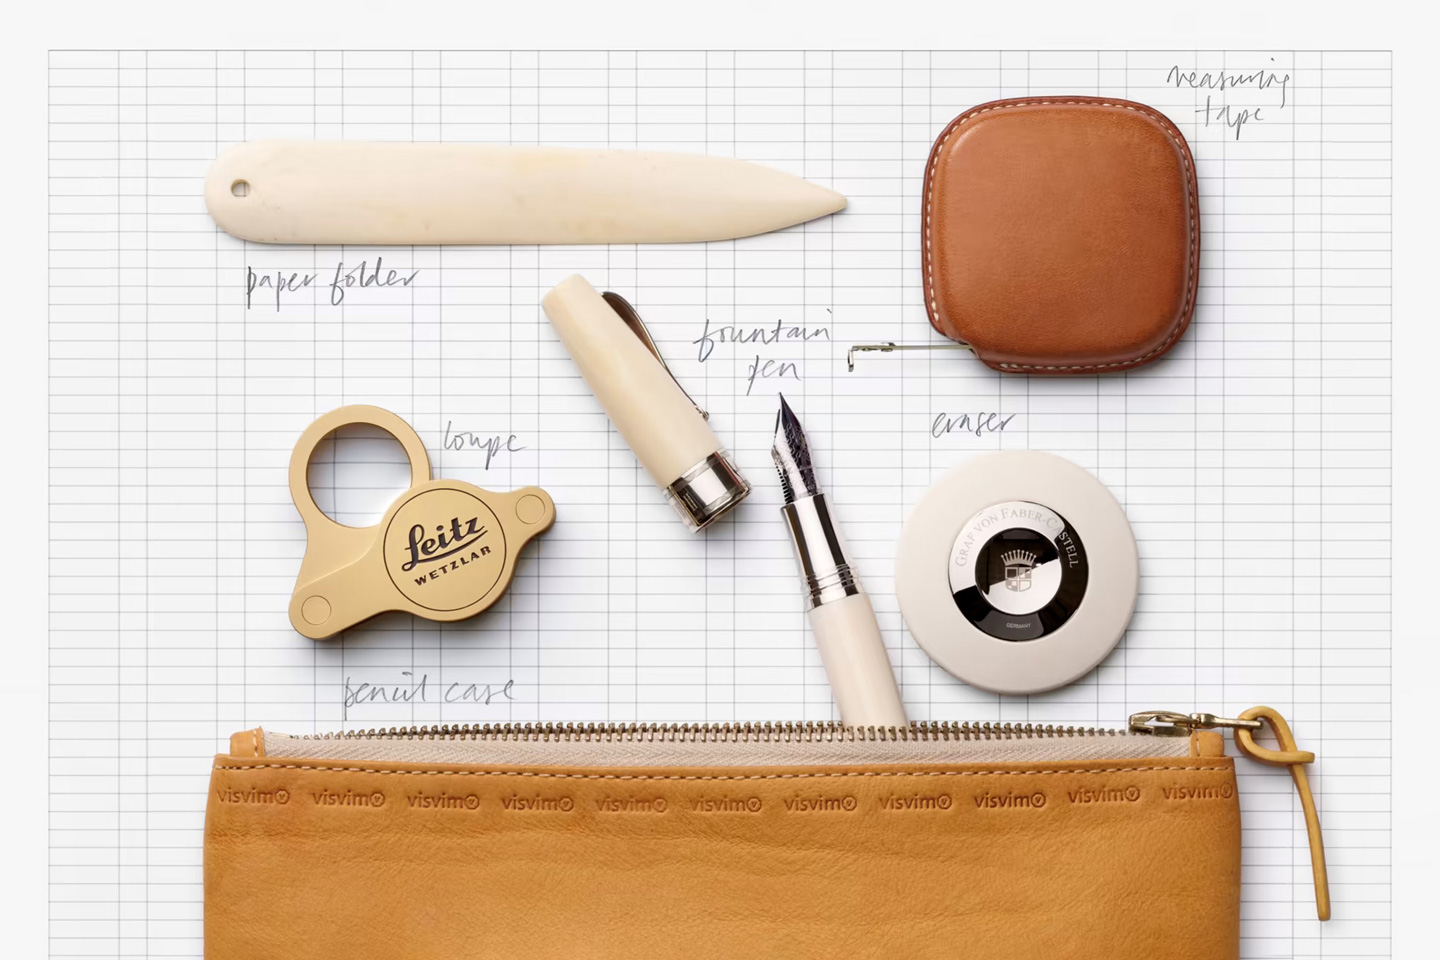 #Apple’s former chief designer Jony Ive gives us a rare look at his everyday design tool kit